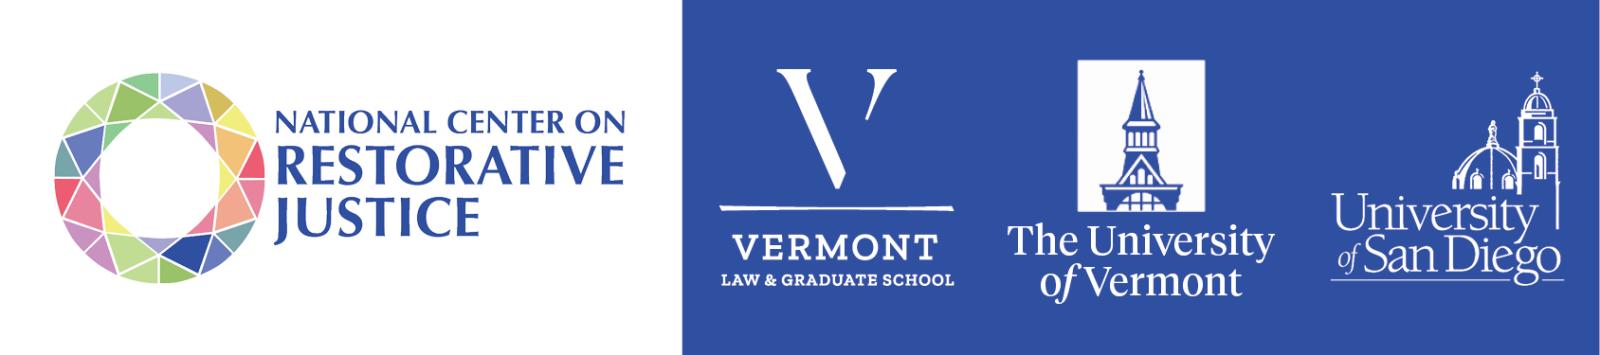 Banner image of the National Center on Restorative Justice at Vermont Law and Graduate School